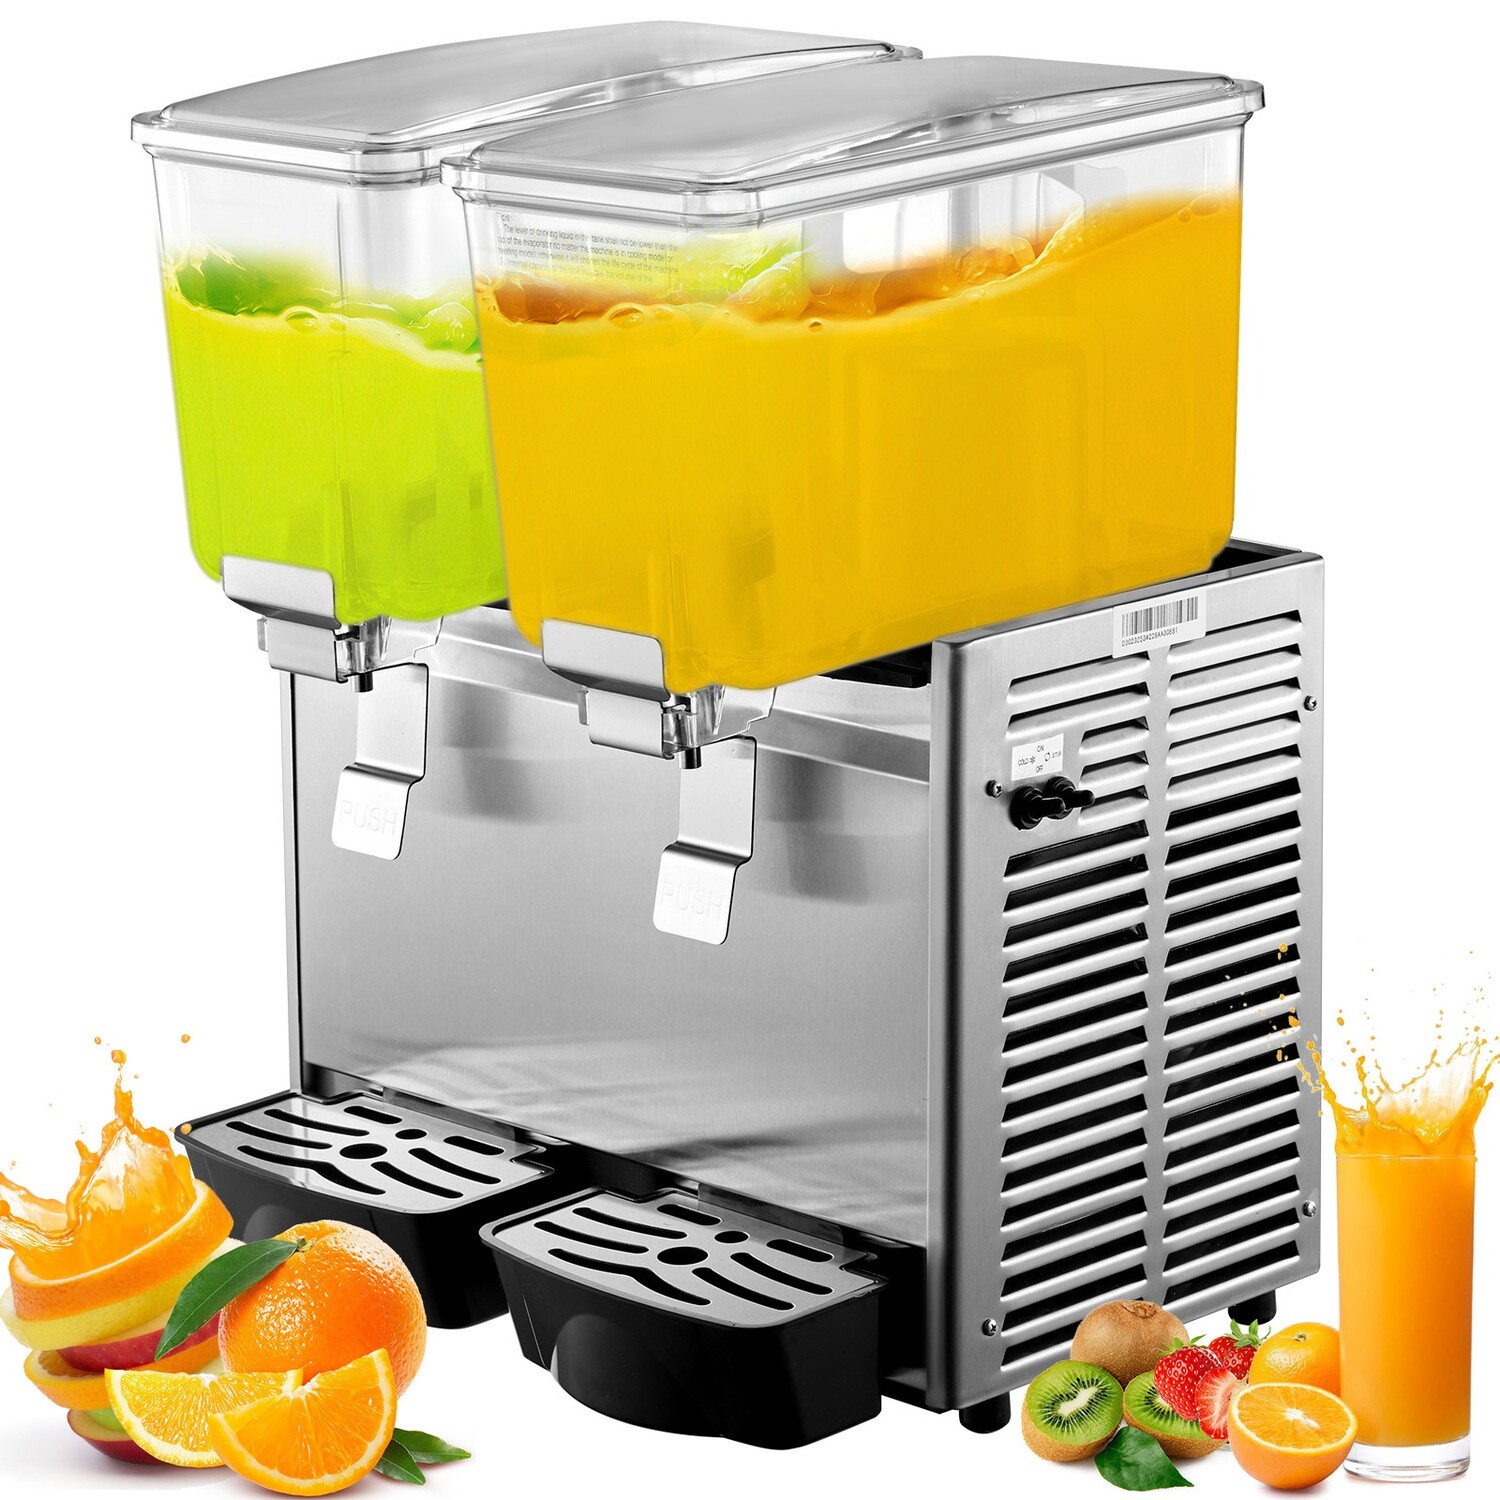 Commercial Stainless Steel Fruit Juice Beverage Dispensers 2 Tanks 6.4 Gallon